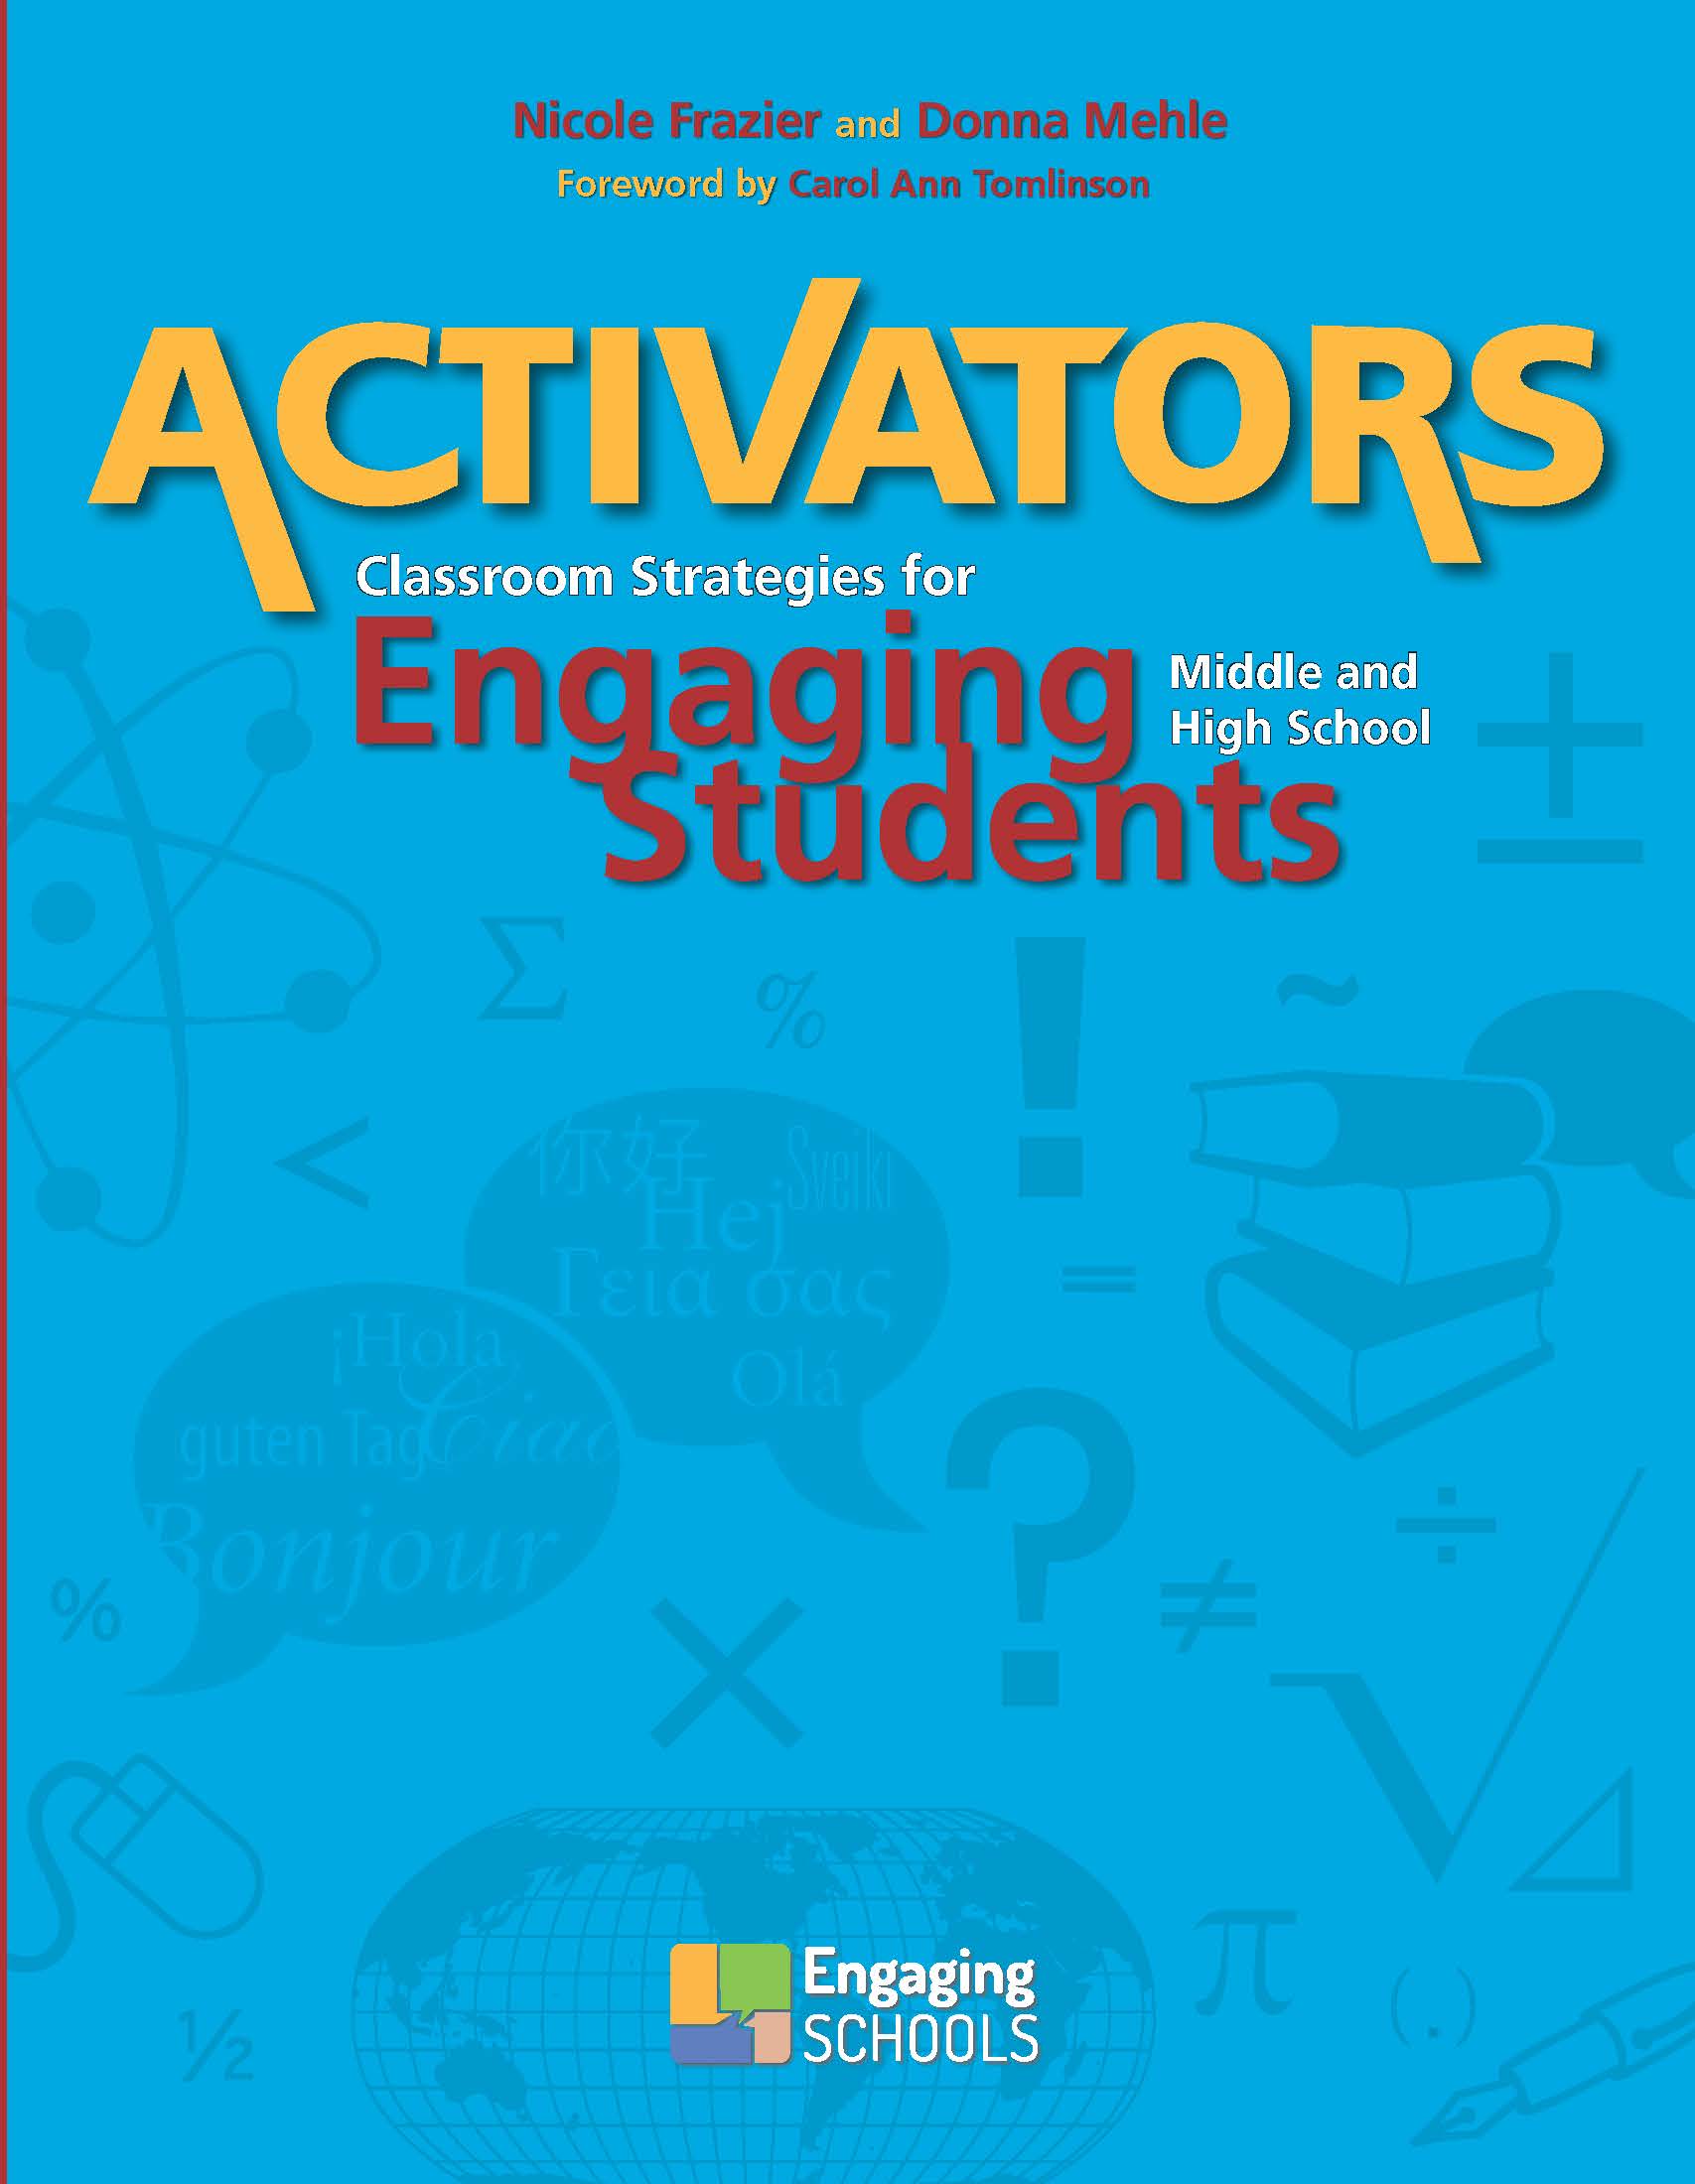 Activators: Classroom Strategies for Engaging Middle and High School Students (ACTIVA)